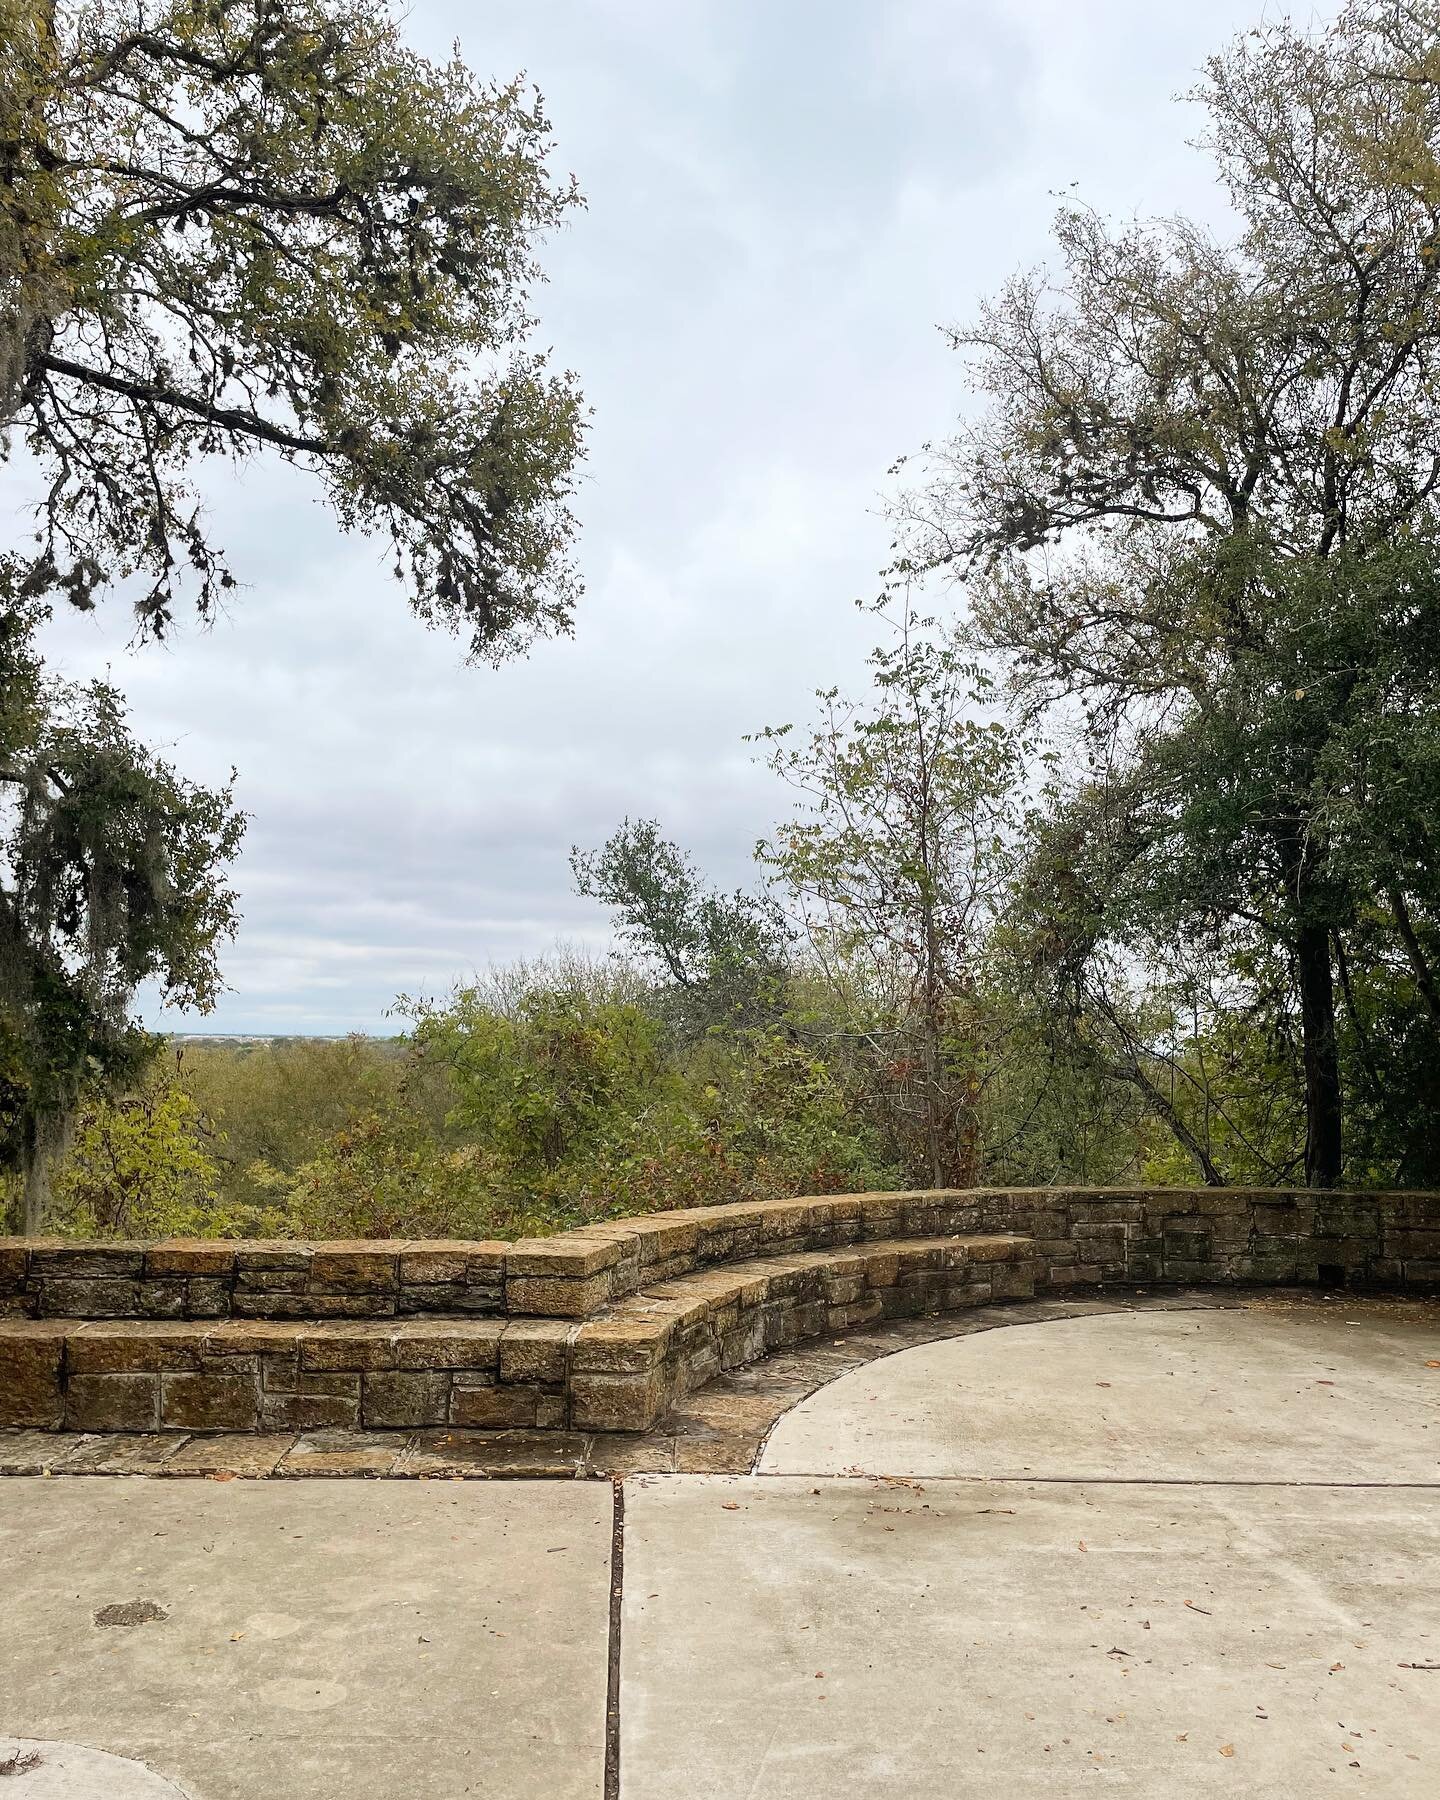 Interested in receiving massage with a view? This view? From this particular vista at the historic hall at Lockhart State Park? How about at sunset? Sunrise?

Then join me for SPIRAL TIME, an experimental dance retreat happening April 27-30 in Lockha